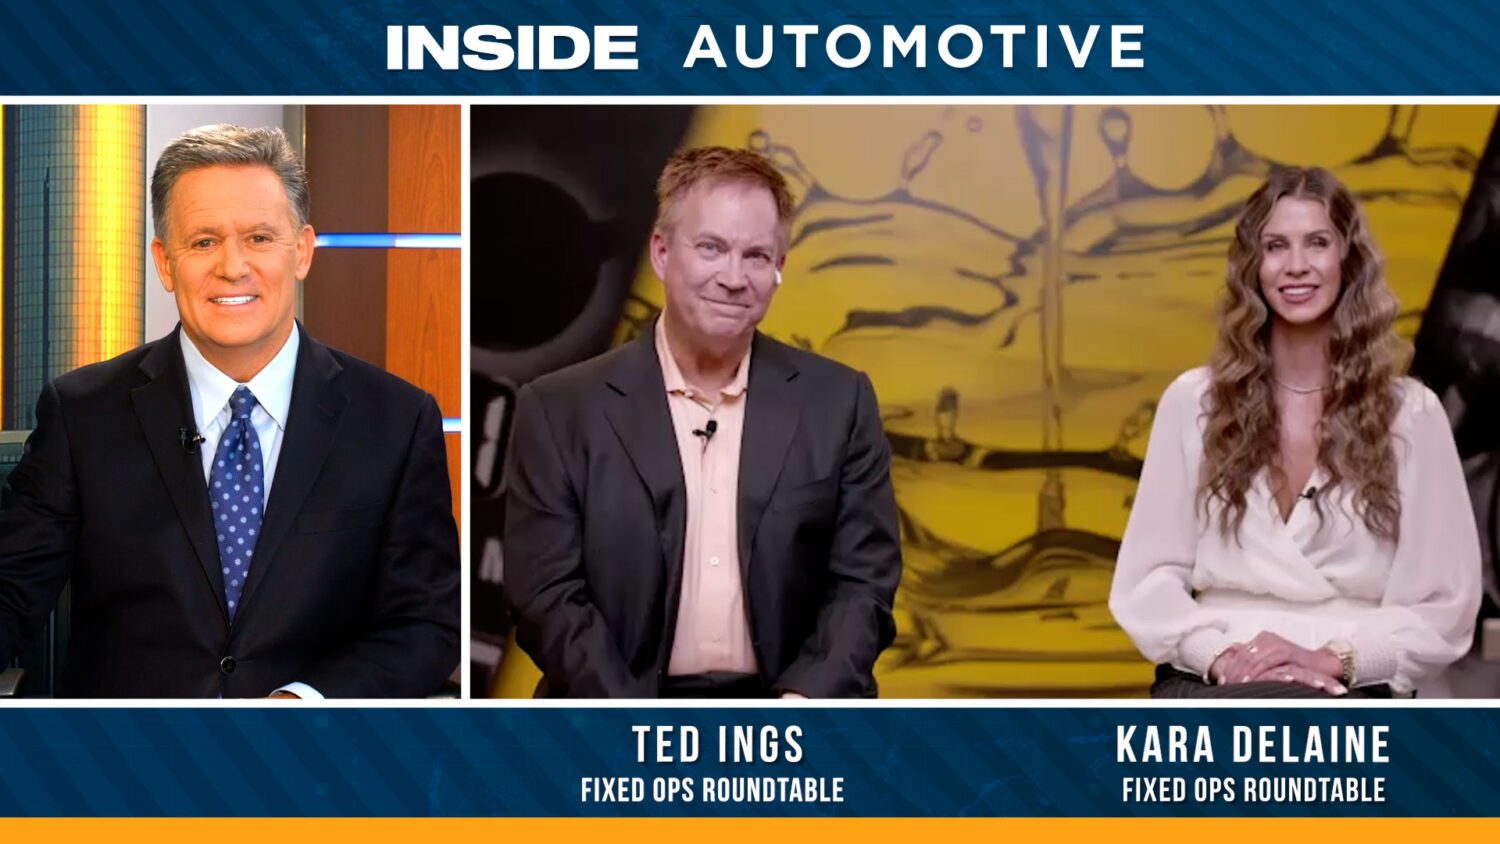 Kara Delaine and Ted Ings from the Fixed Ops Roundtable join Inside Automotive to discuss new opportunities opening up in the service space